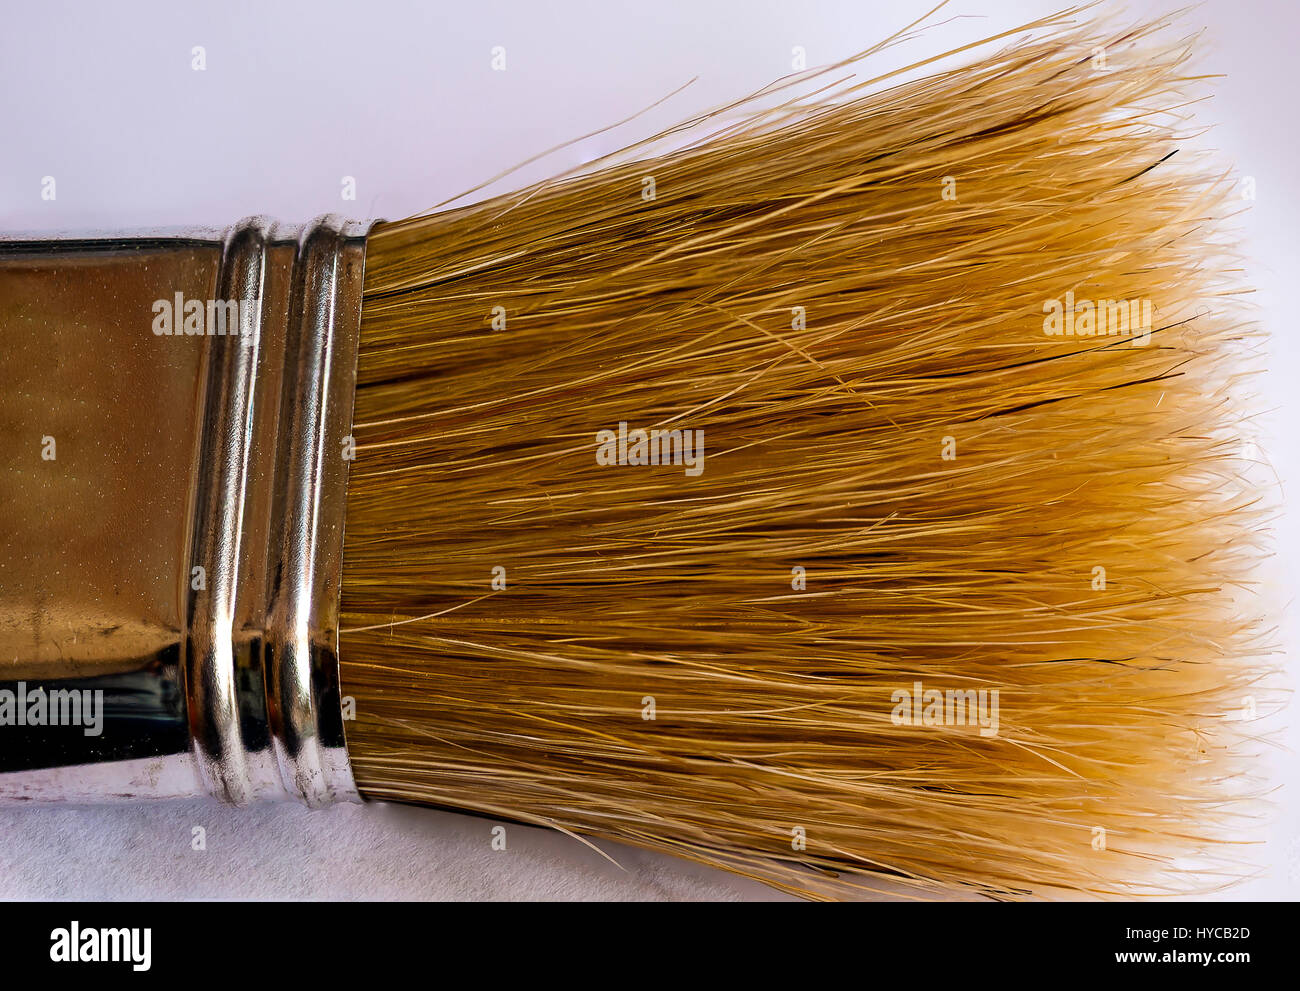 extreme close up of old paint brush bristles Stock Photo